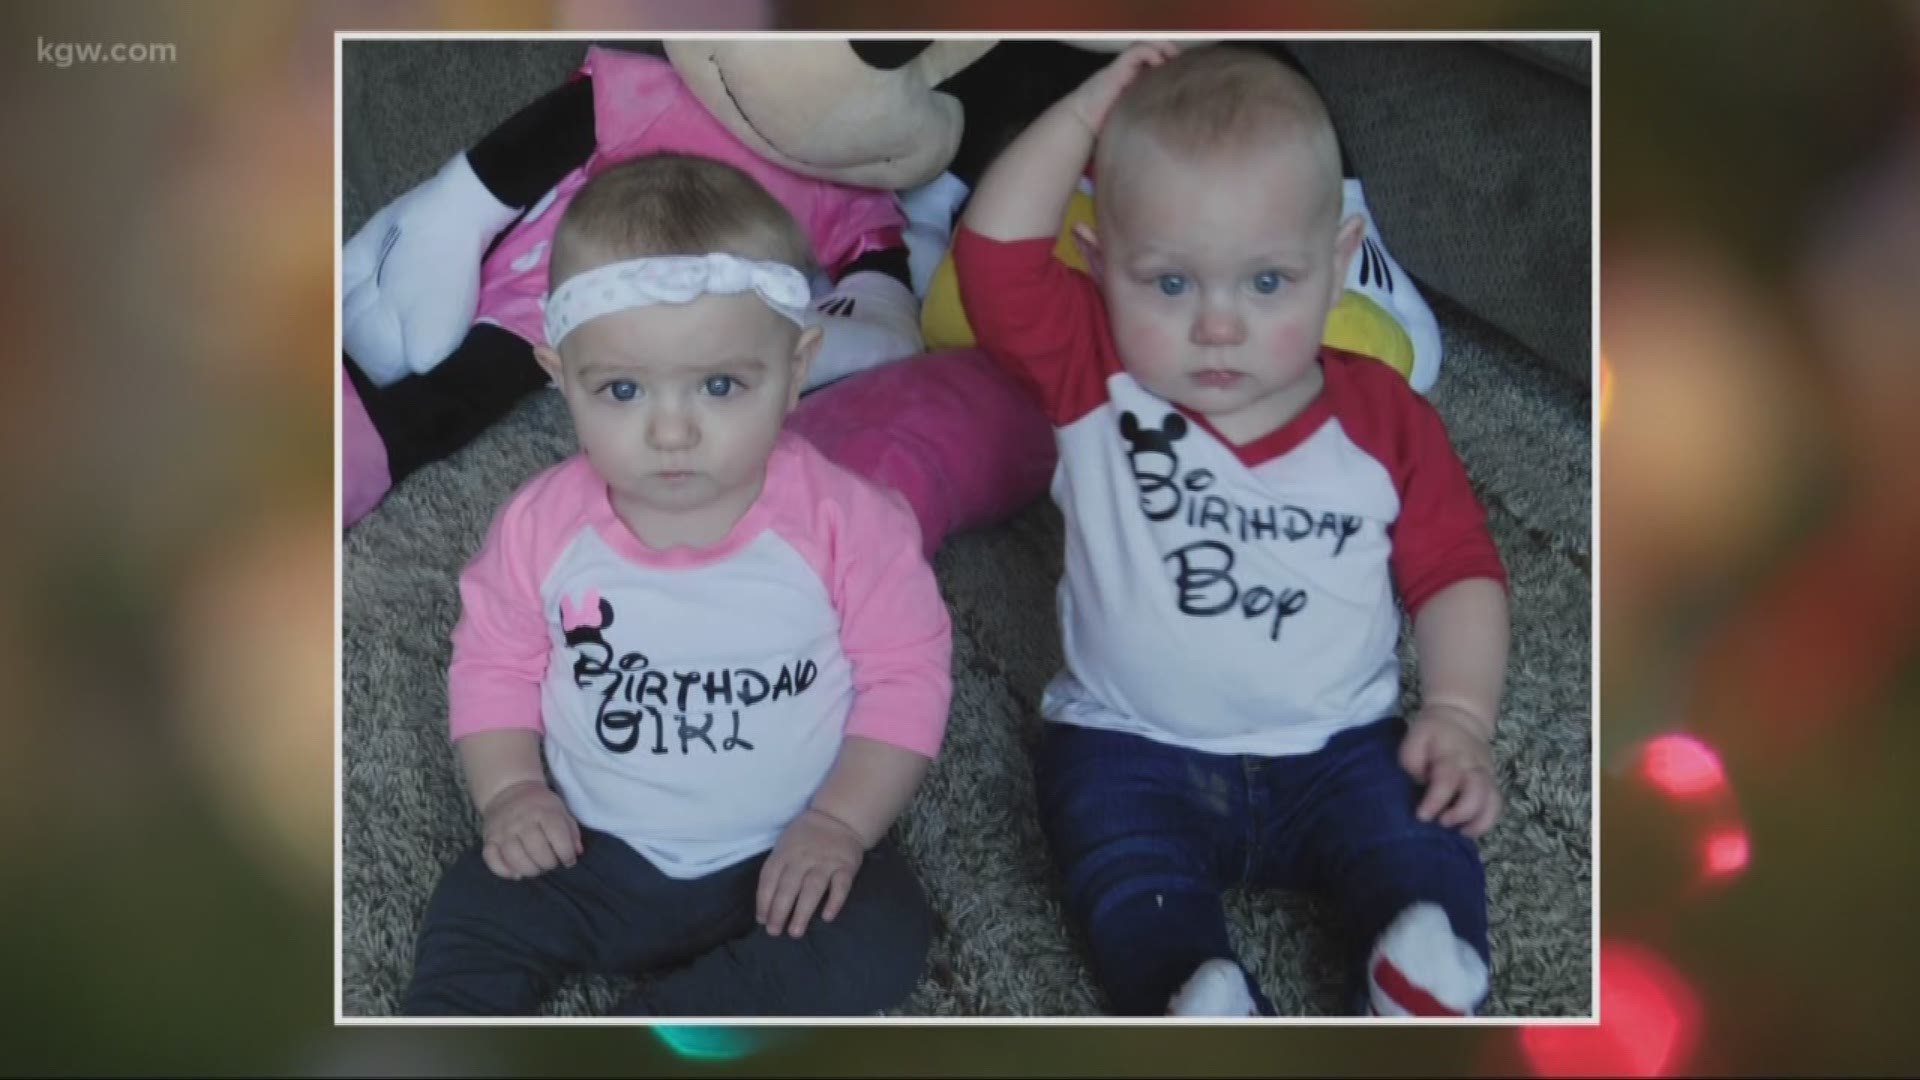 Jim and Joanna Hall have plenty to be thankful for this year after their twins were born 15 weeks prematurely.